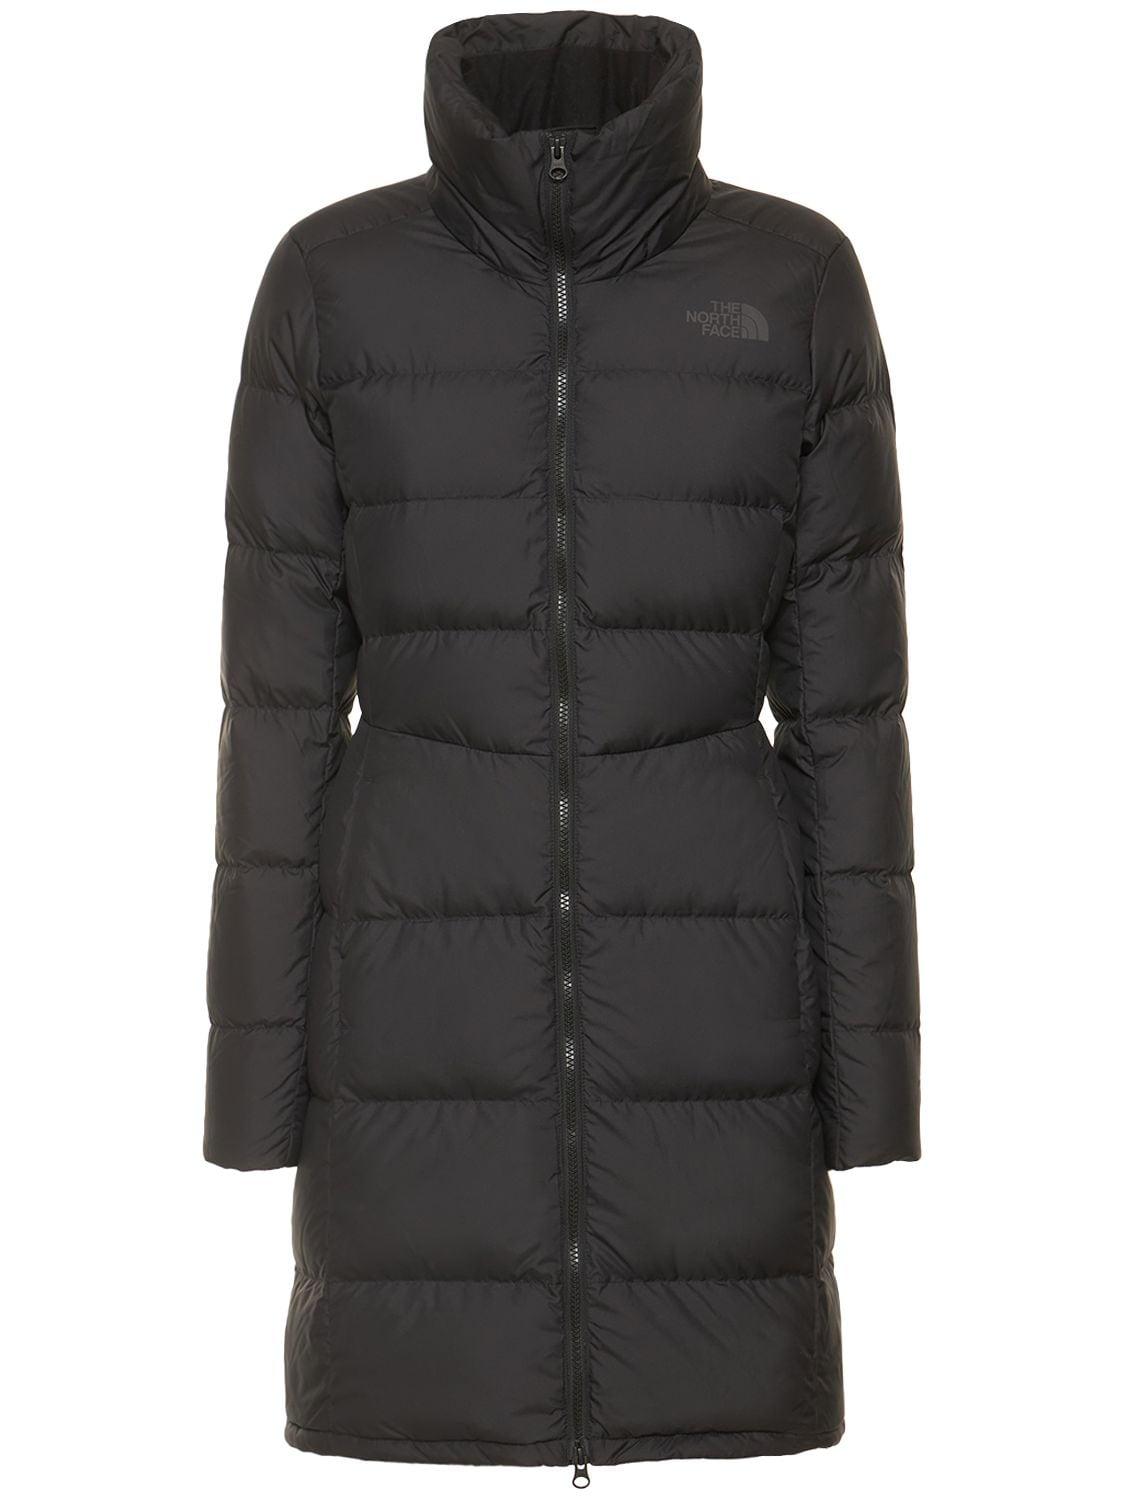 The North Face Metropolis Down Parka in Black | Lyst UK